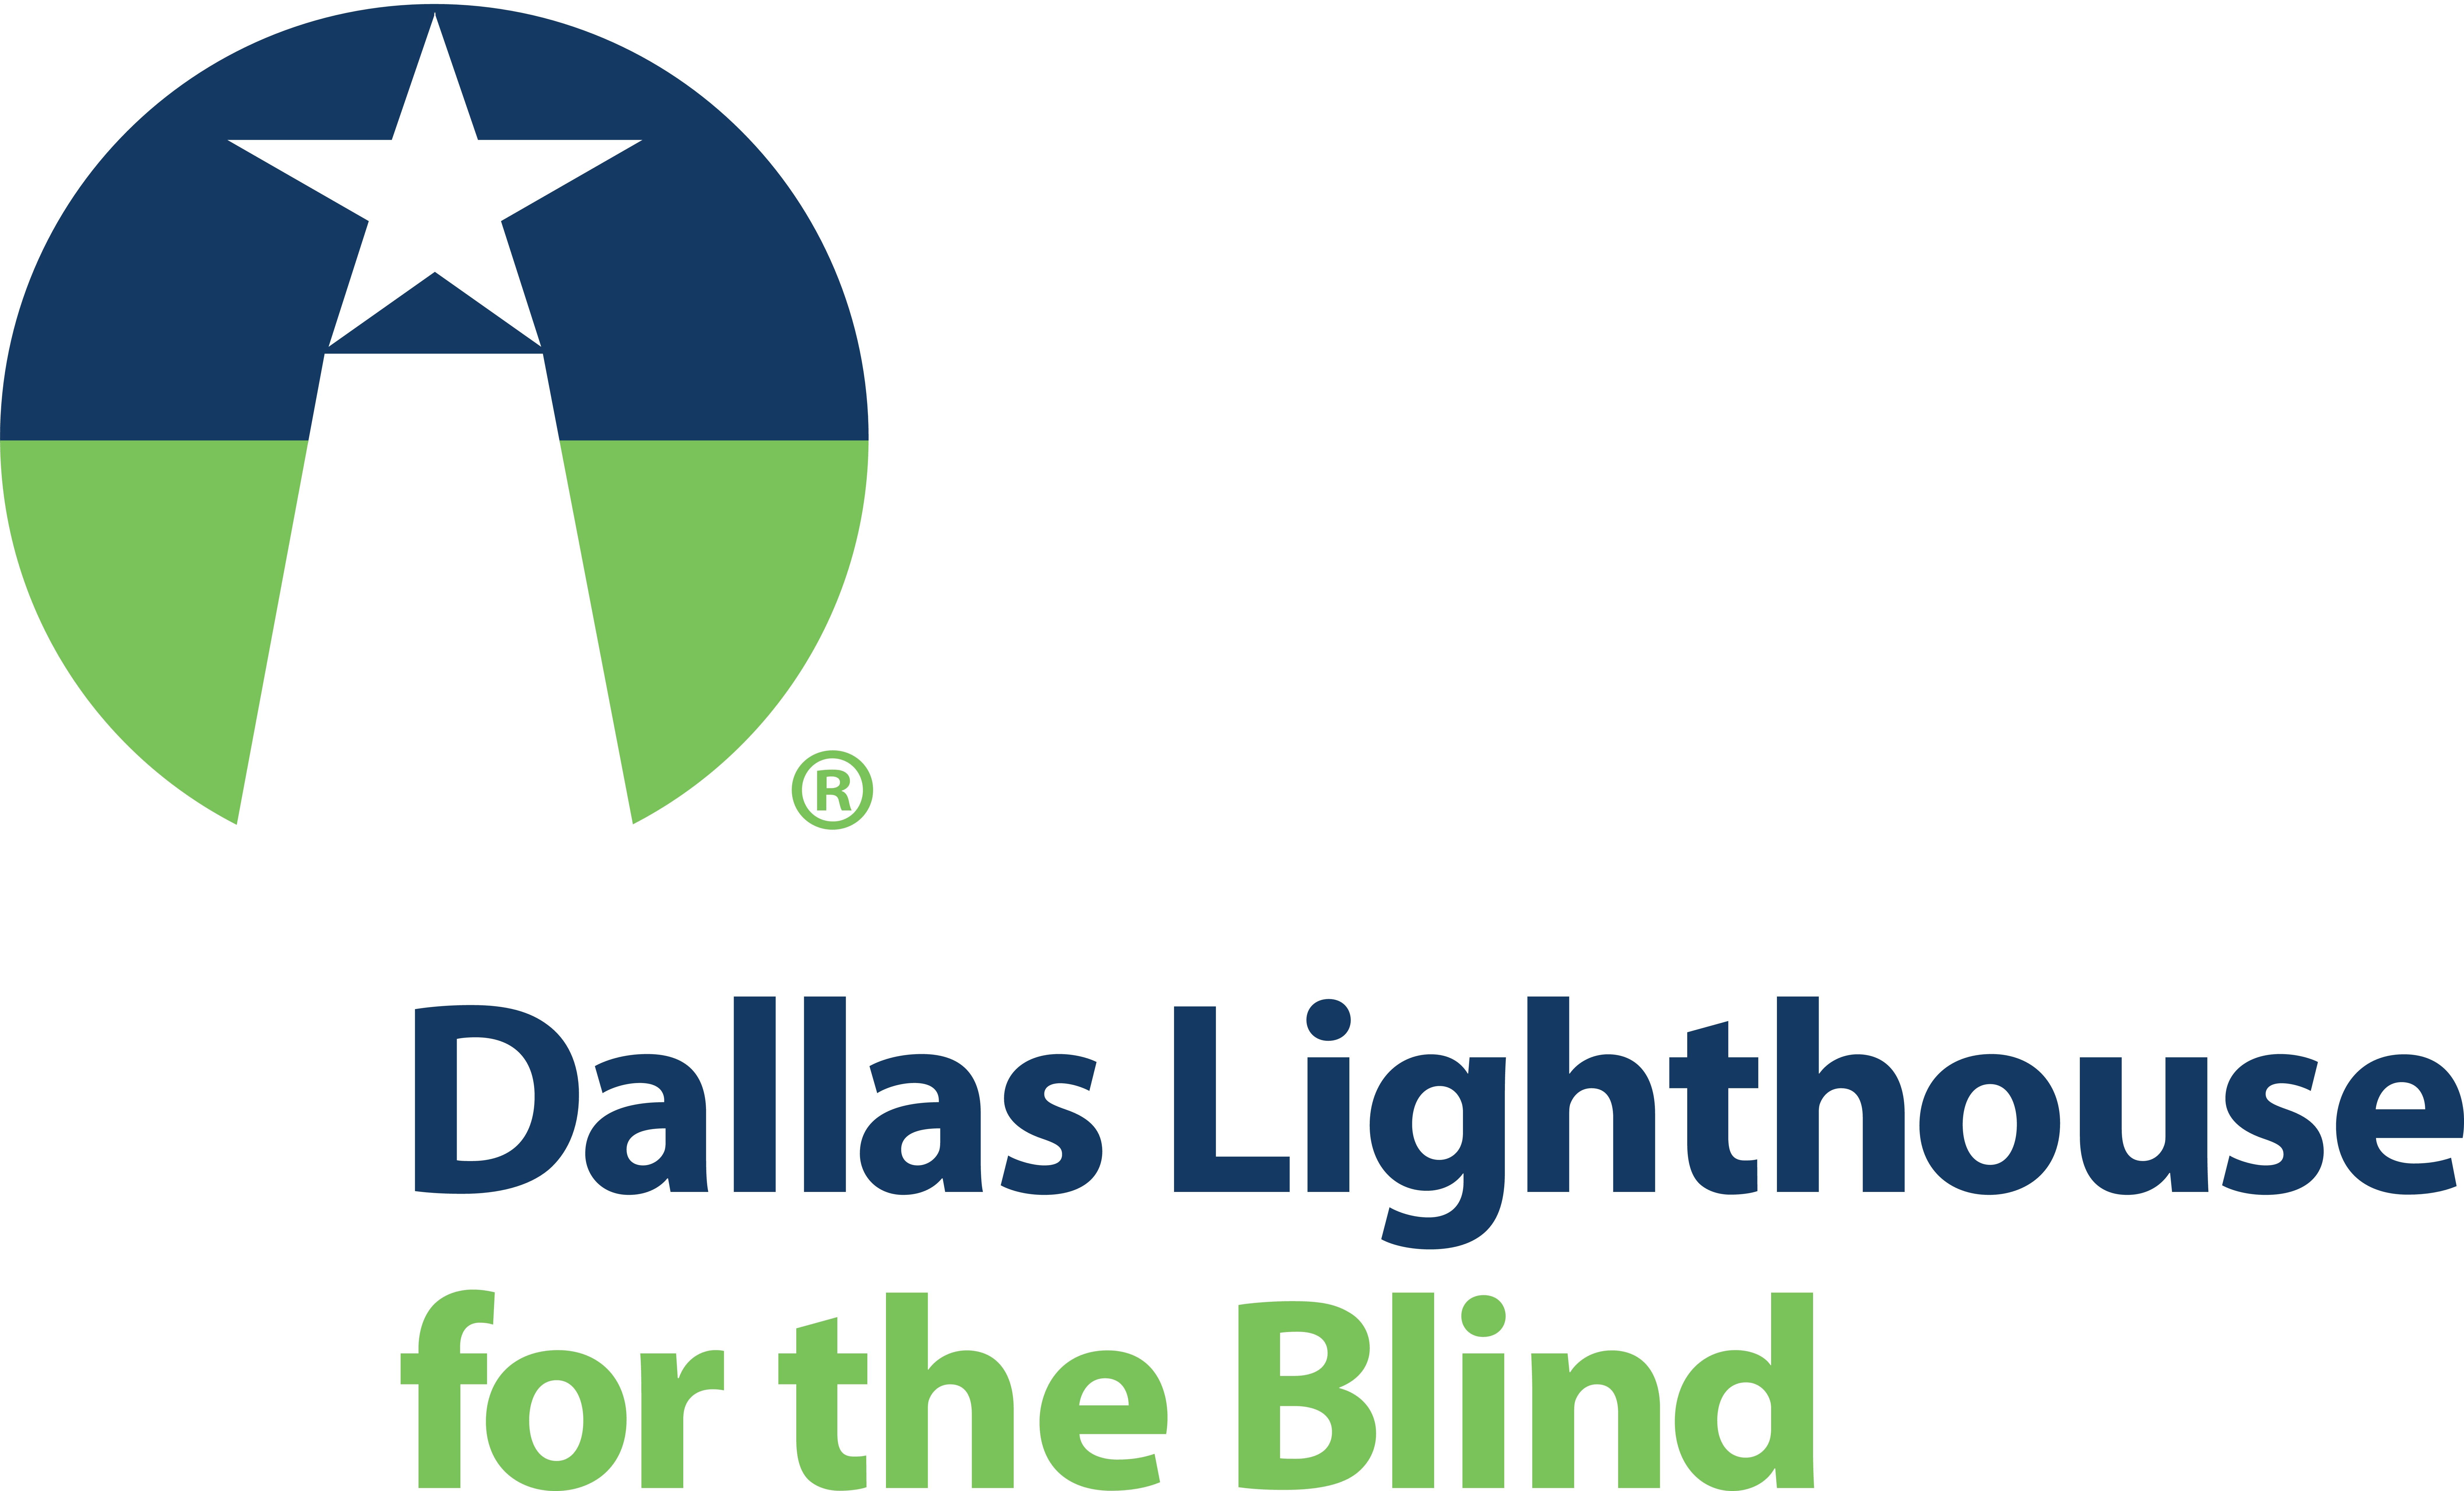 Dallas Lighthouse of the Blind is merging with Wichita-based Envision, Inc. Operations will continue as normal in Dallas, and the Dallas Lighthouse for the Blind name will be retained.